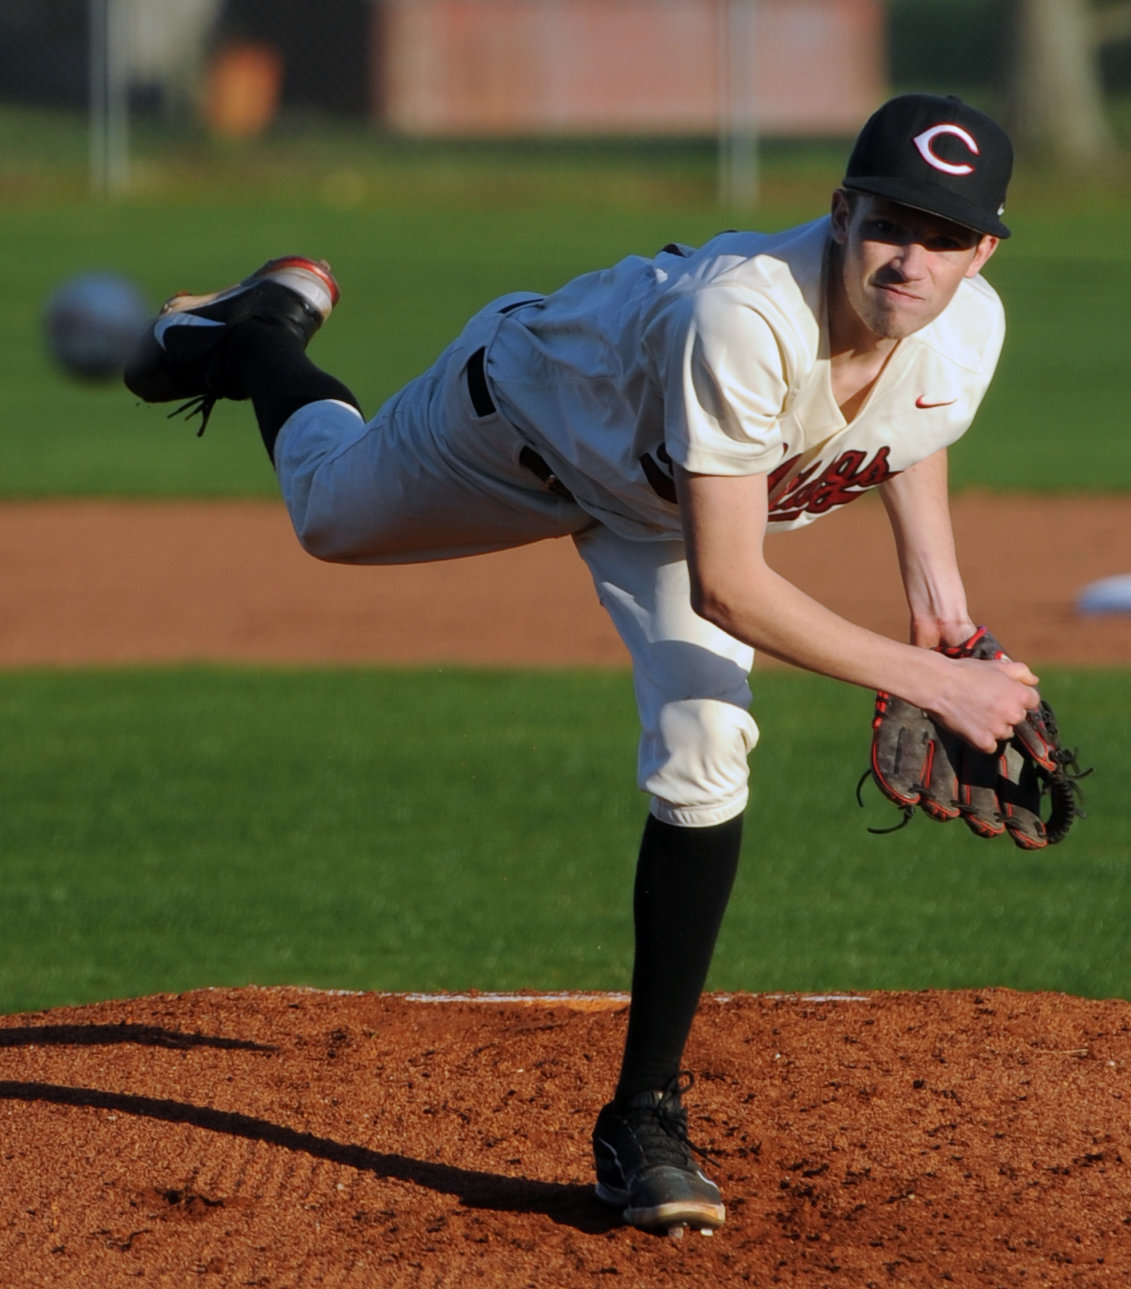 Aaron Gann delivers a pitch for a strike against Moore County on Monday night.